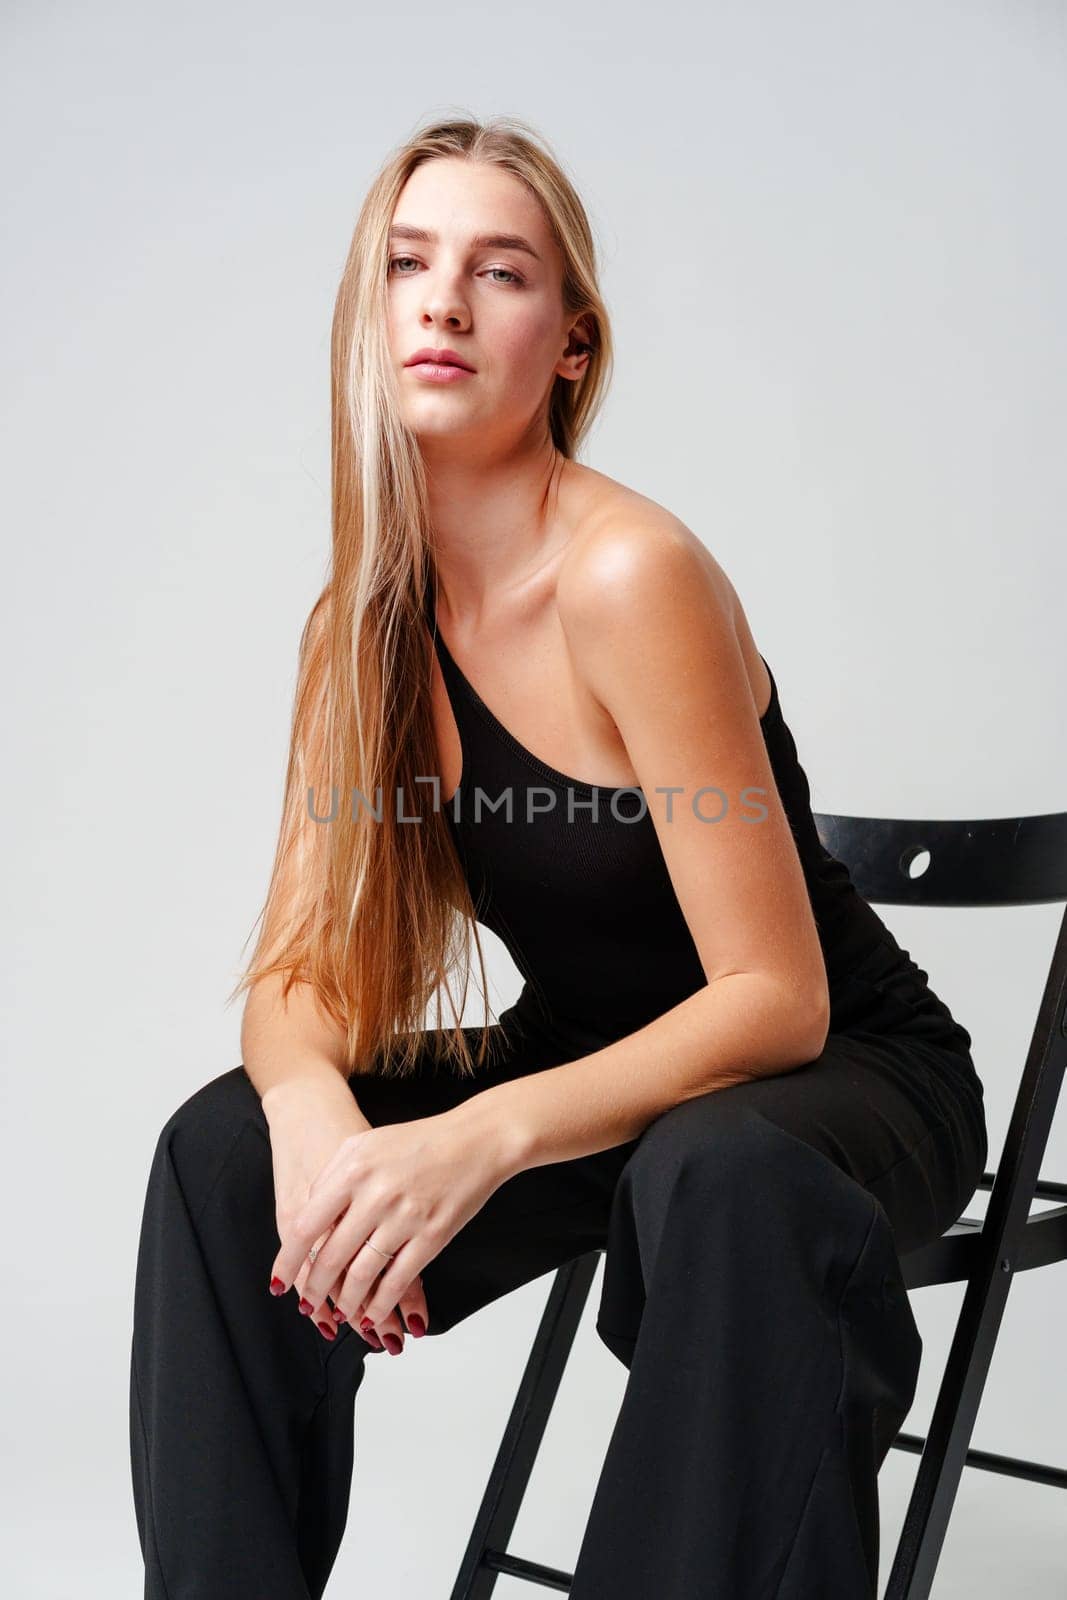 Young Woman Sitting on Chair Posing for Picture in studio